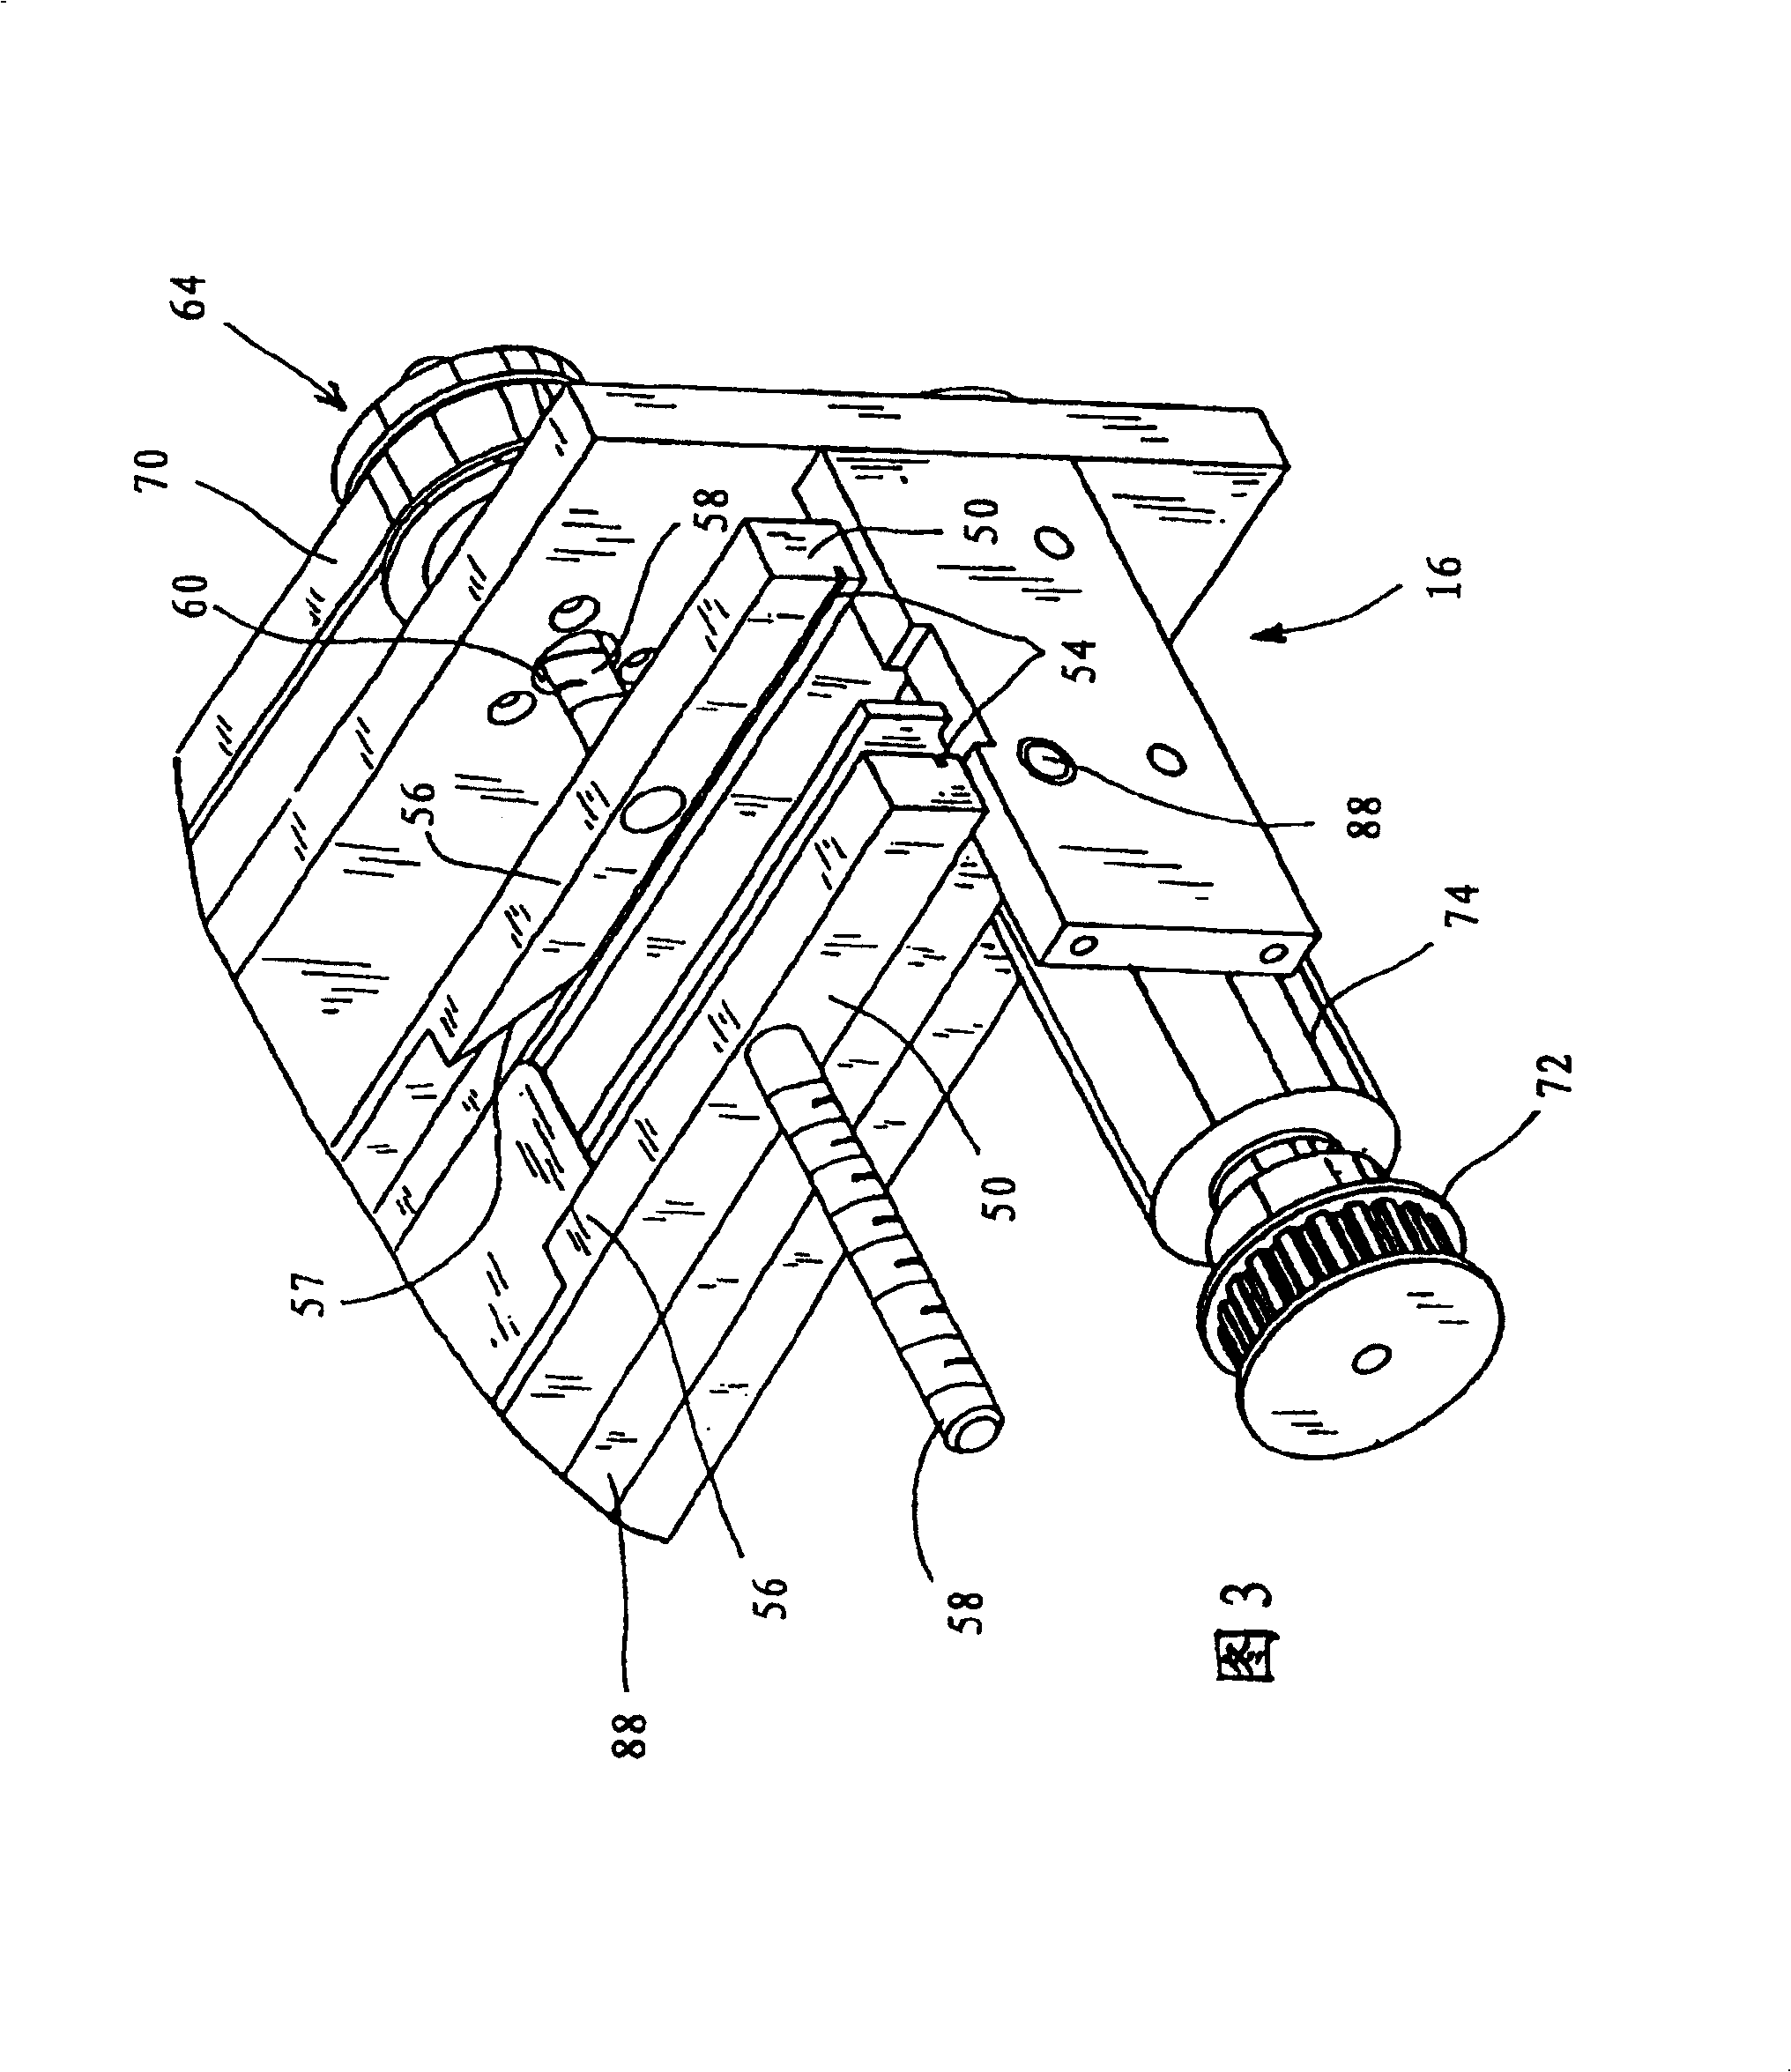 A device for cutting packages containing a plurality of product units